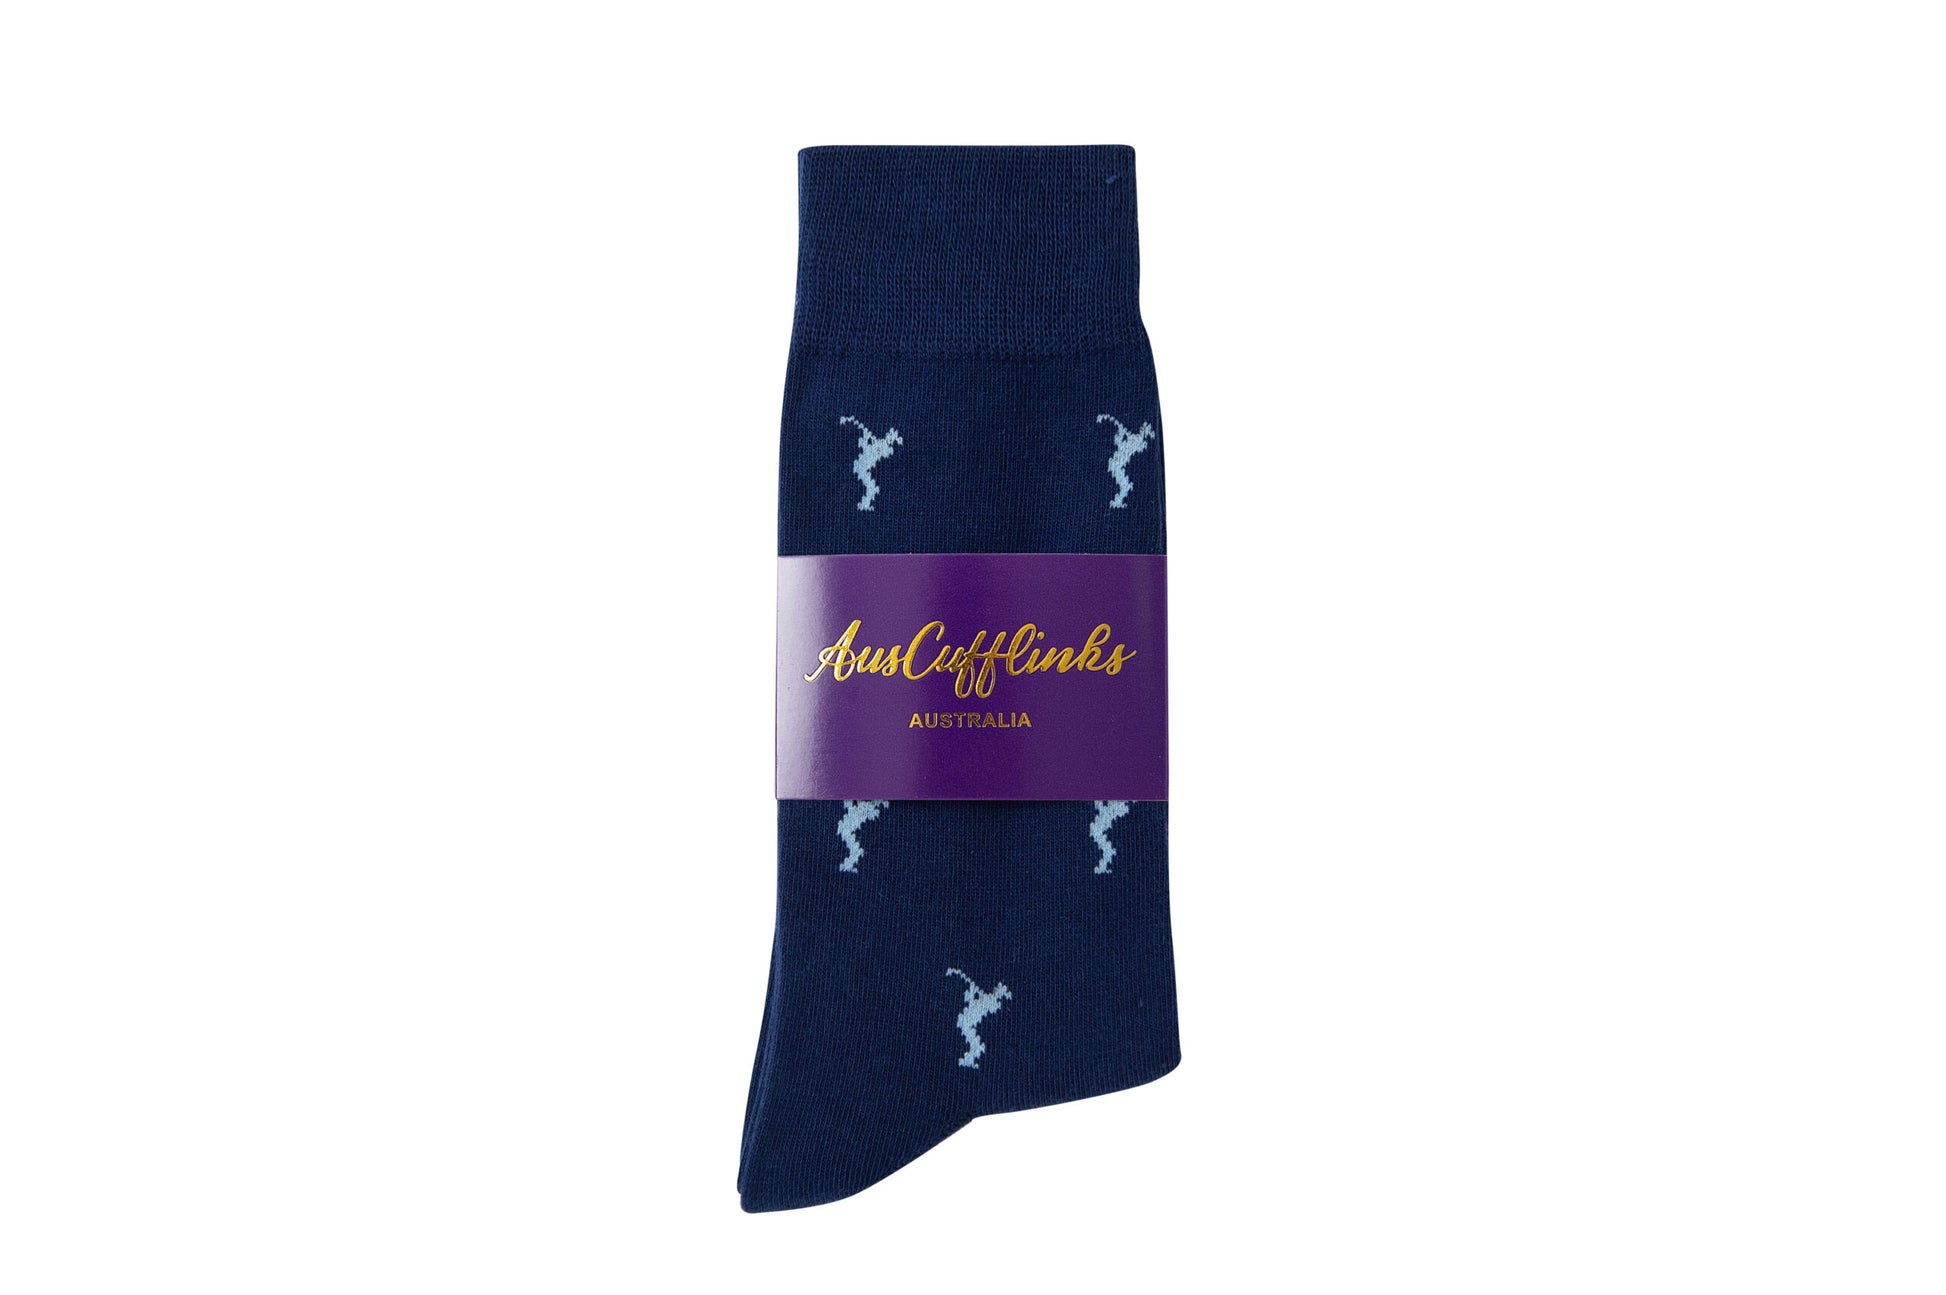 A Golf Swing Blue Sock with a label on it.